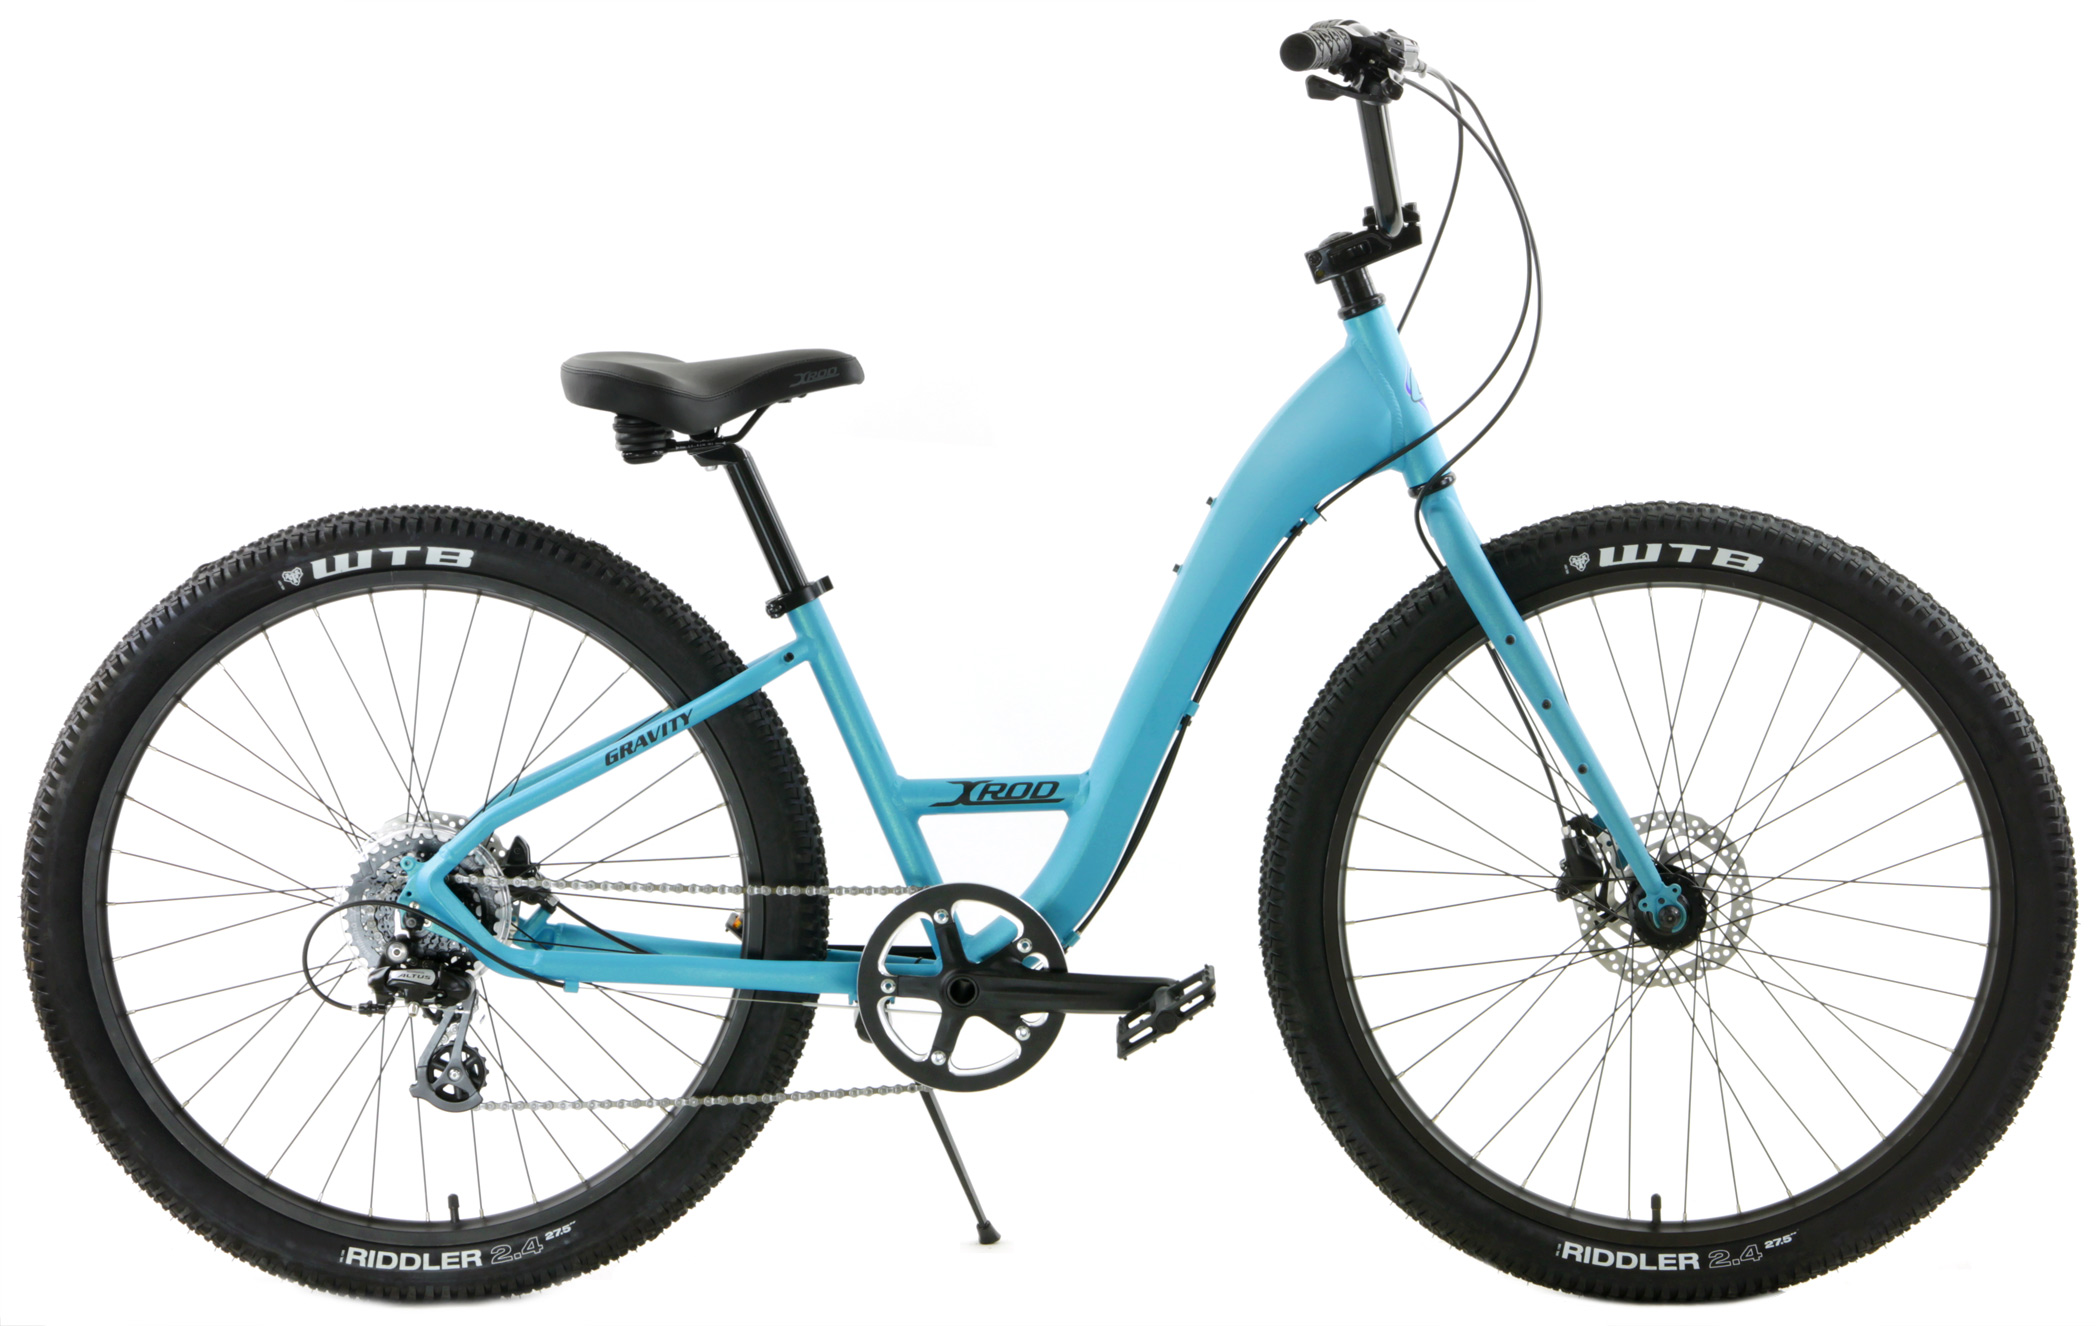 Save up to 60% off new Super Hybrid Comfort Fitness Bikes -